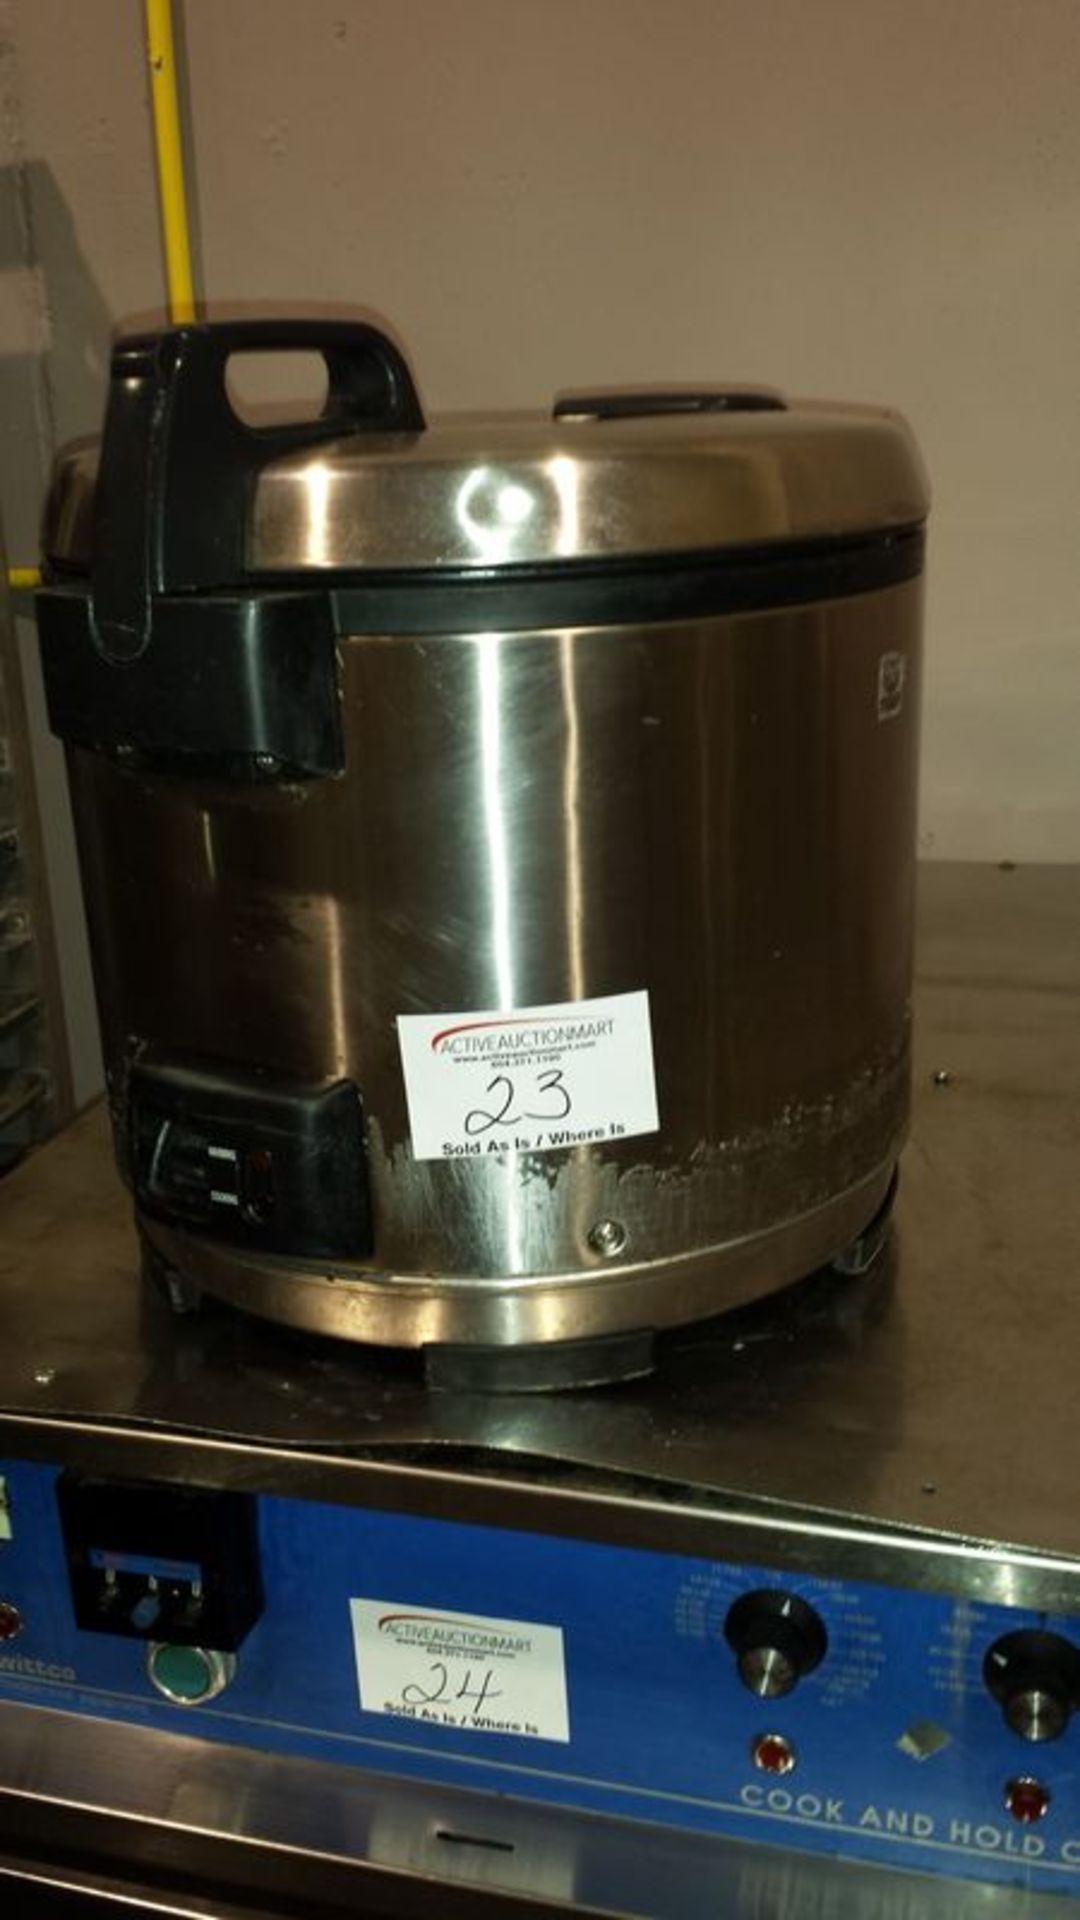 Tiger electric rice cooker